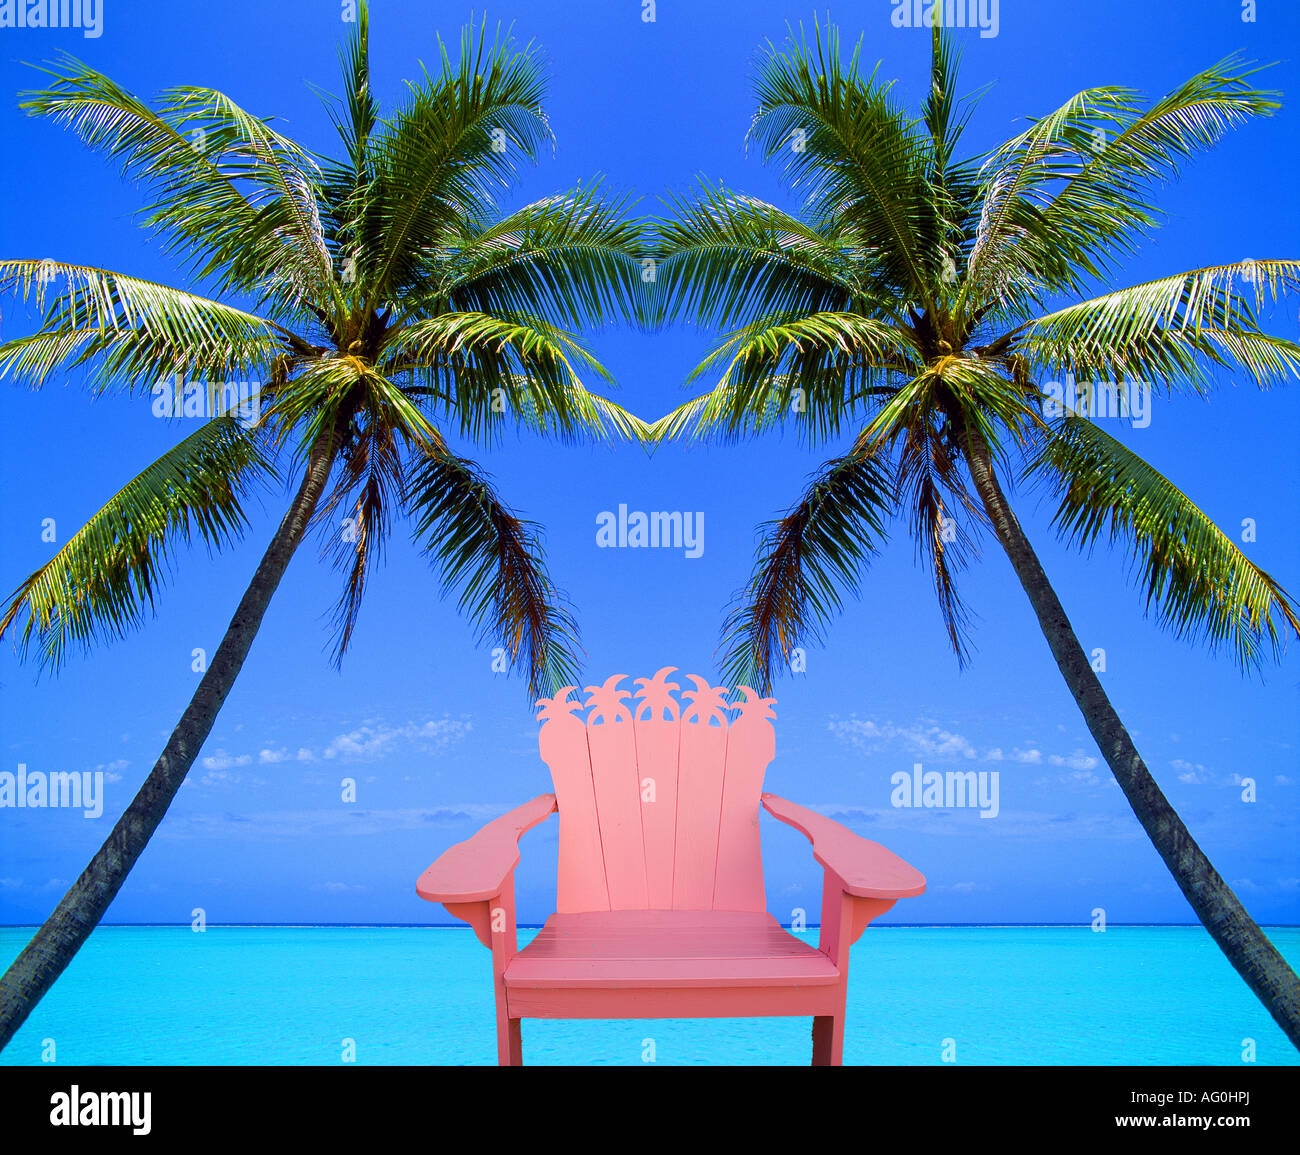 Pink chair and palm trees, Florida Stock Photo